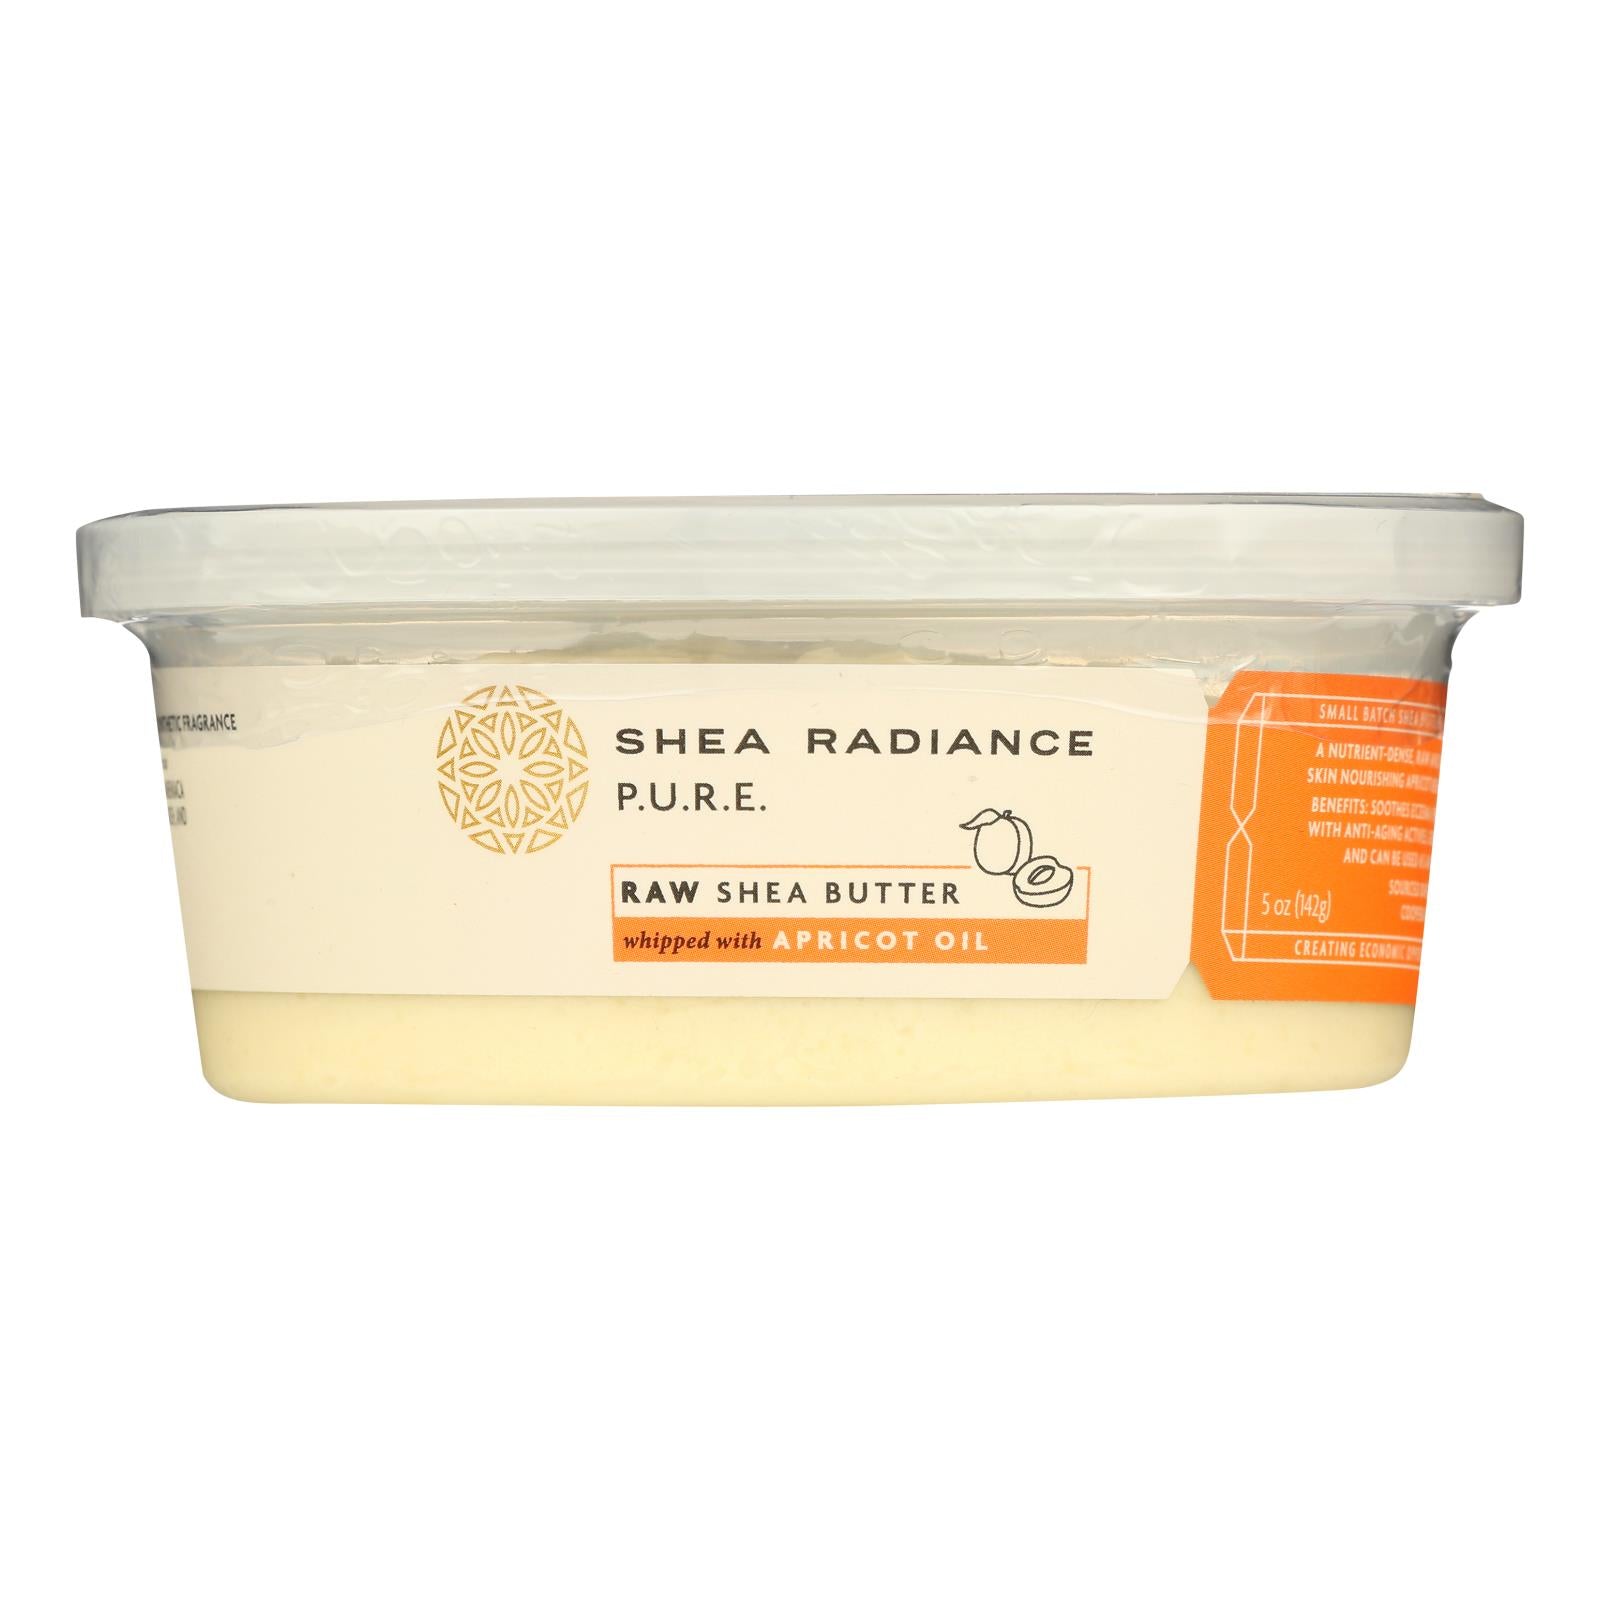 Shea Radiance Whipped Shea Butter With Apricot Oil  - 1 Each - 5 Oz